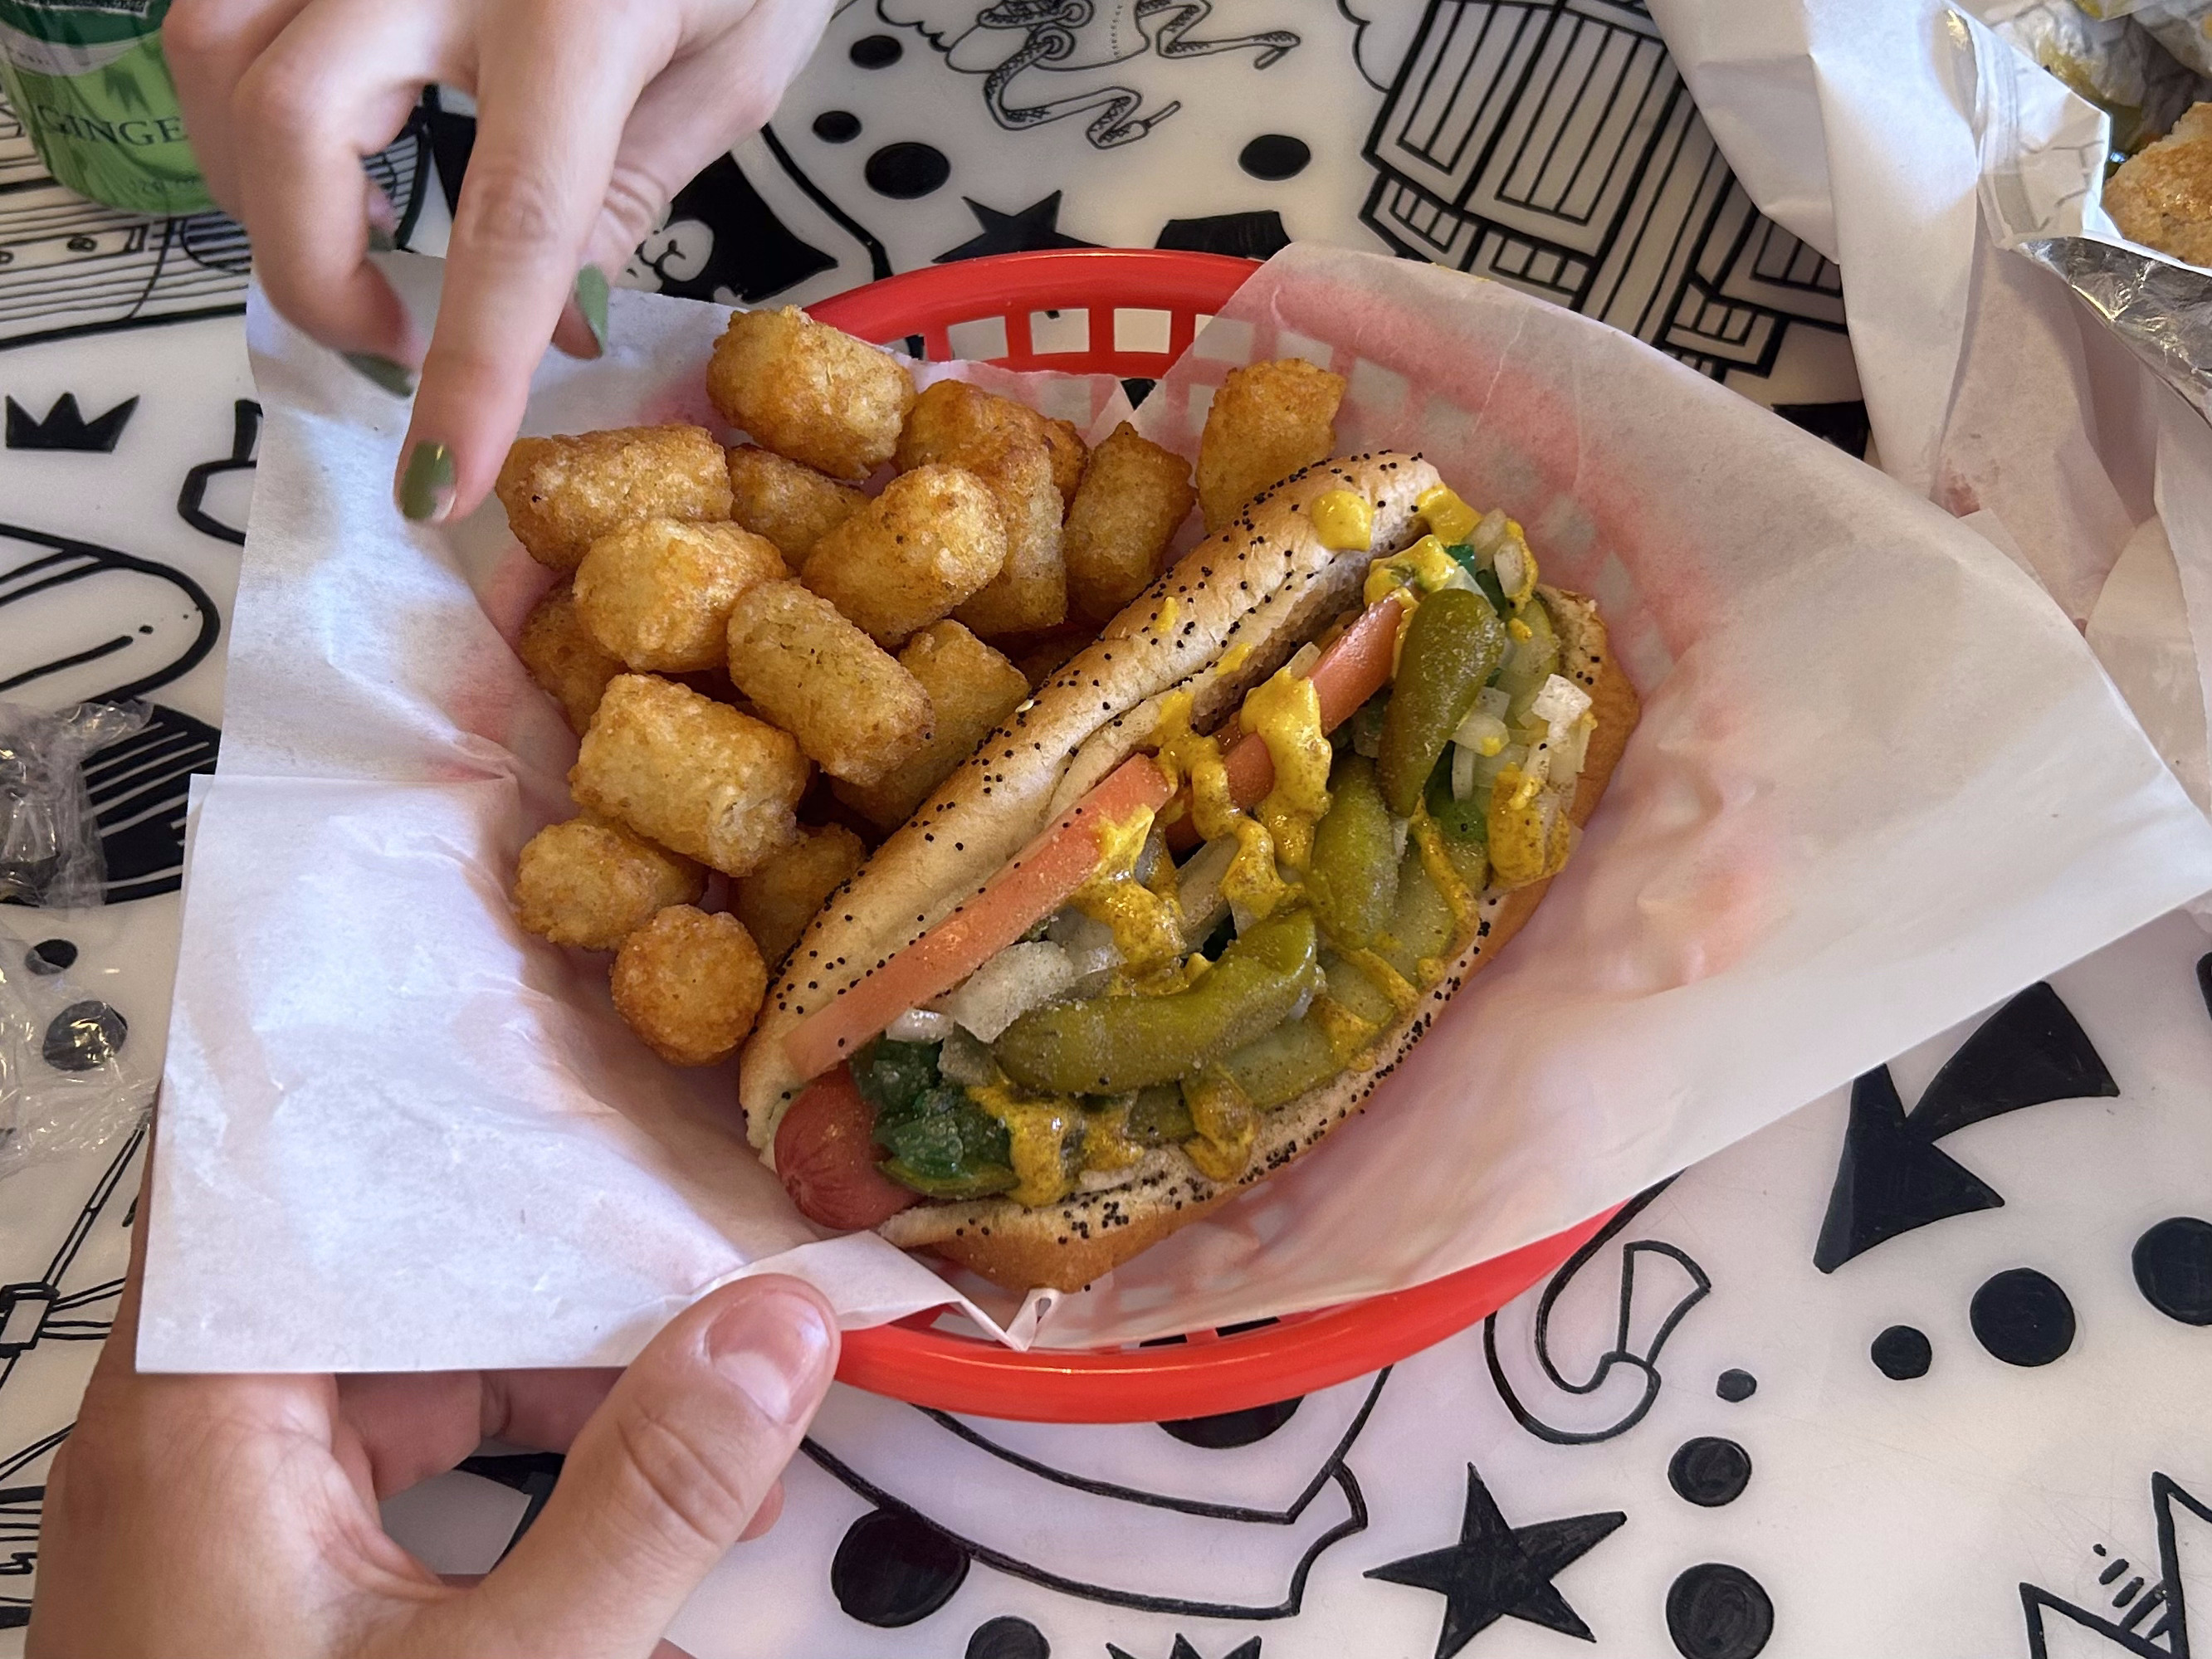 A Chicago-style hot dog with a side of tater tots is served in a red basket with parchment paper.